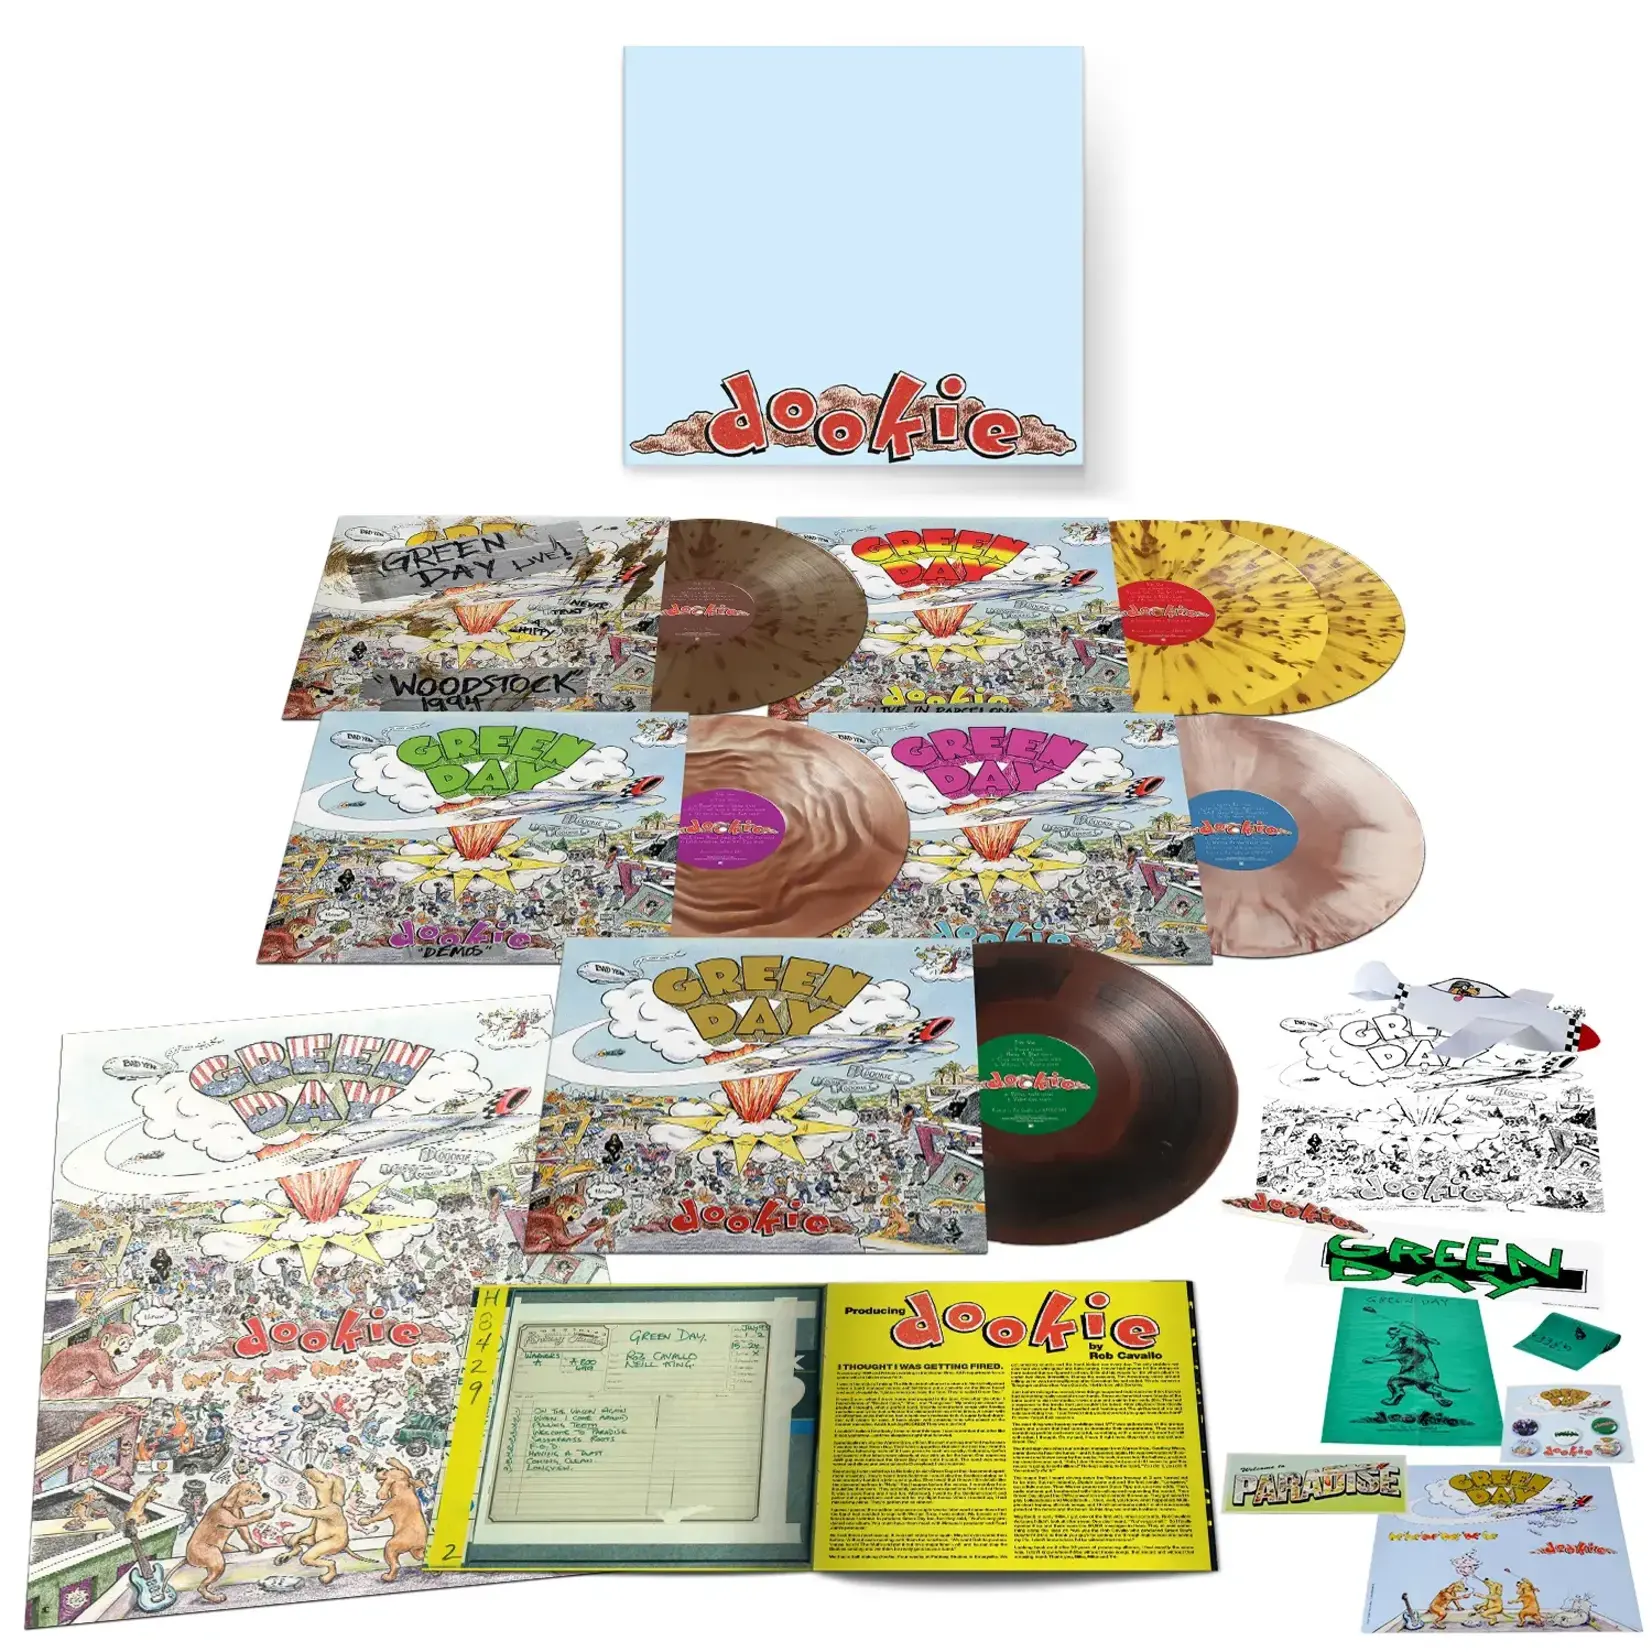 [New] Green Day - Dookie (6LP, 30th Anniversary, deluxe edition, brown viny, lindie exclusive)